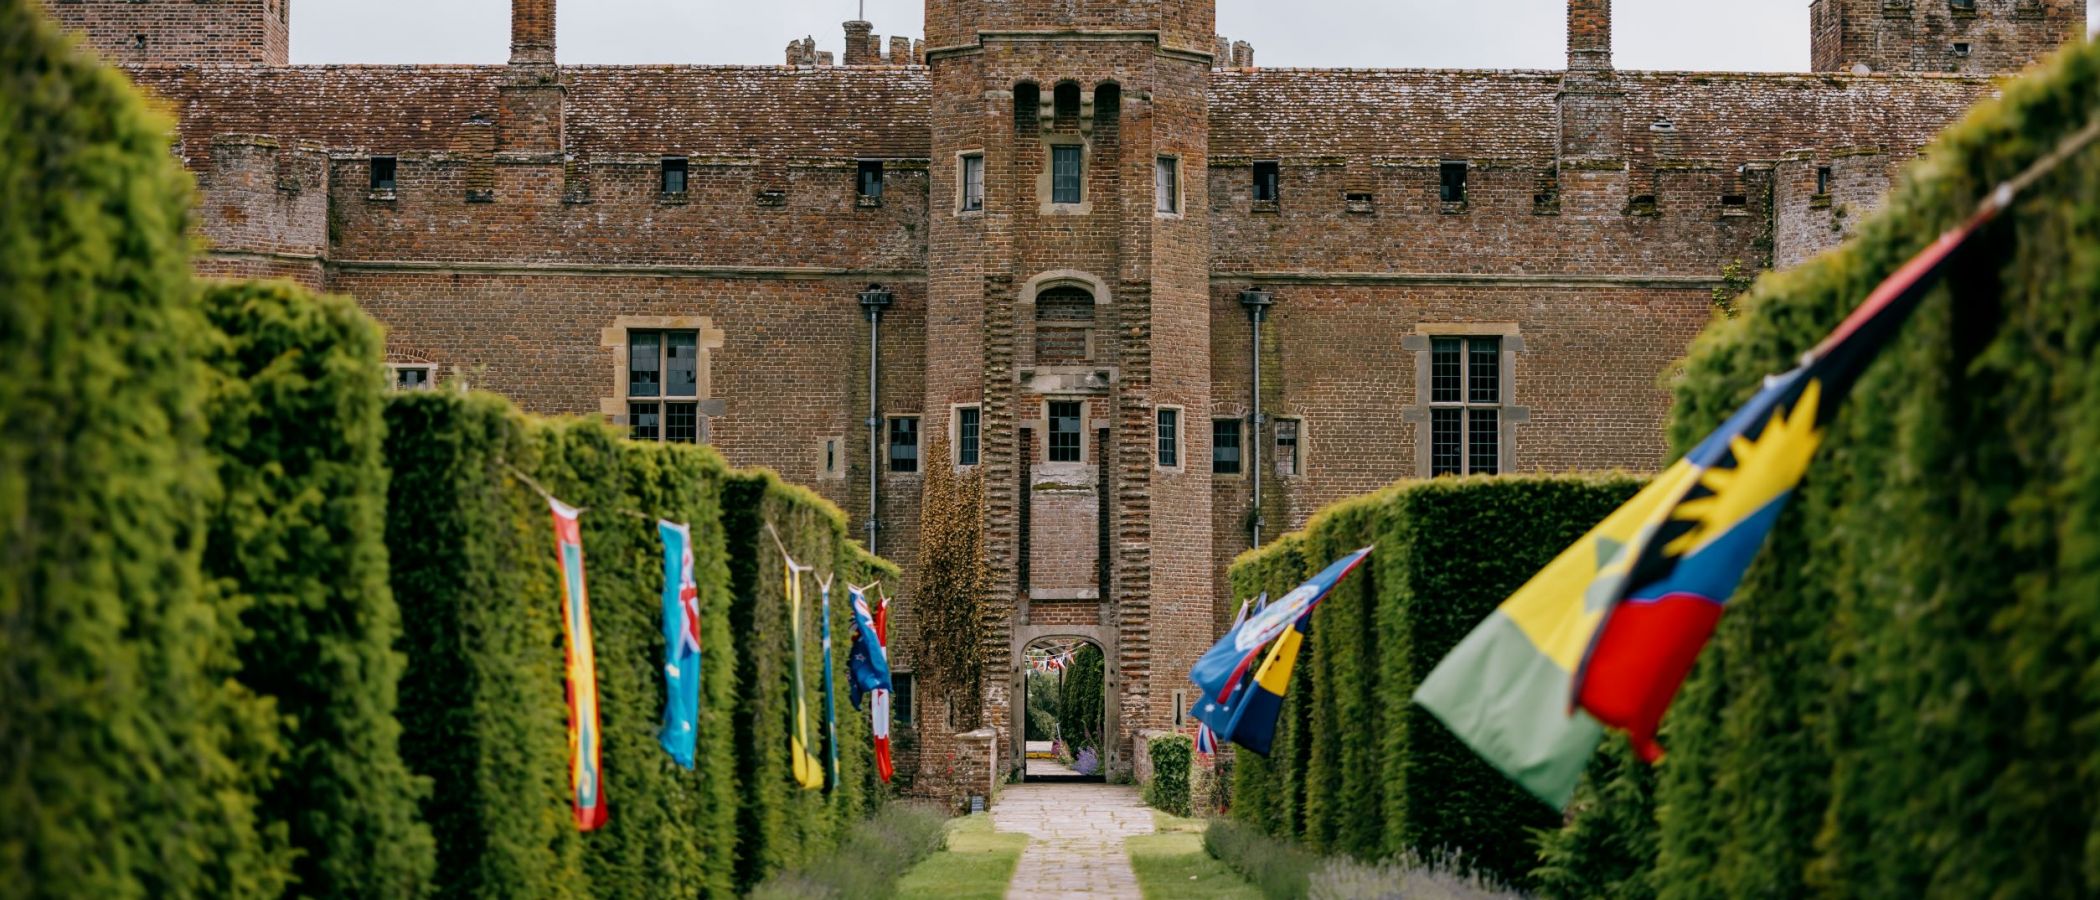 An image of Herstmonceux Castle, UK with various flags down the sides of the hedged walkway 